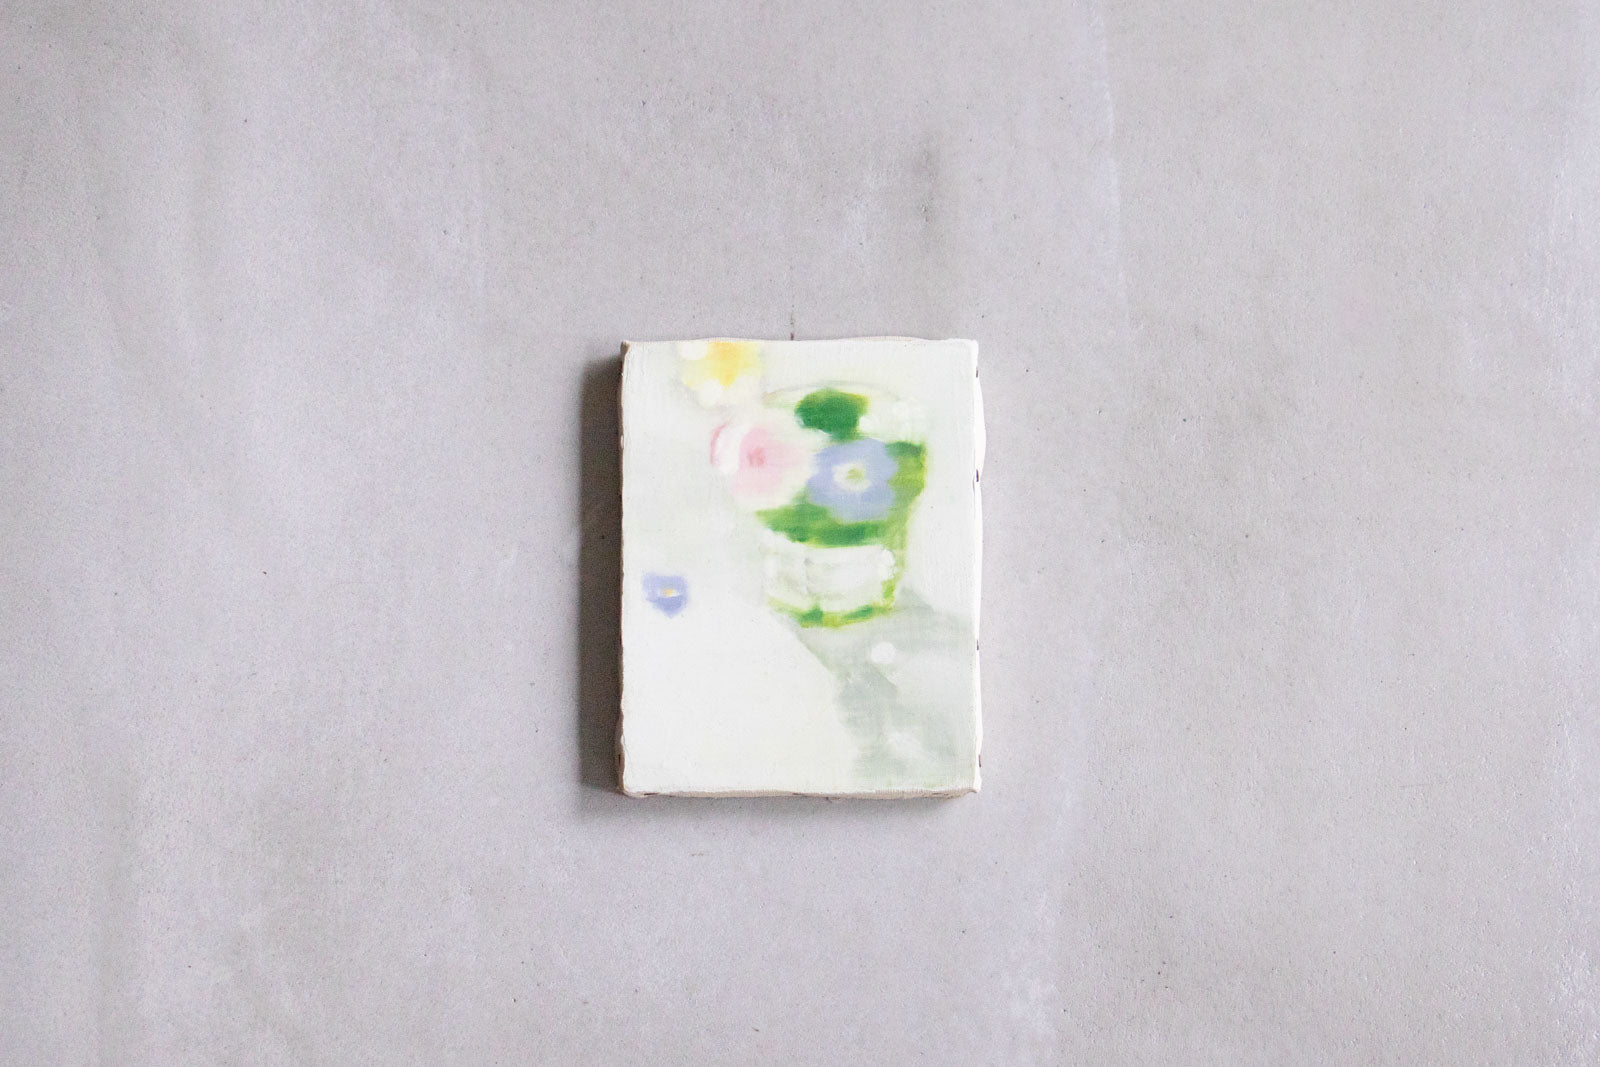 ［『Nature is me』 加藤大 油絵展］005 small flowers